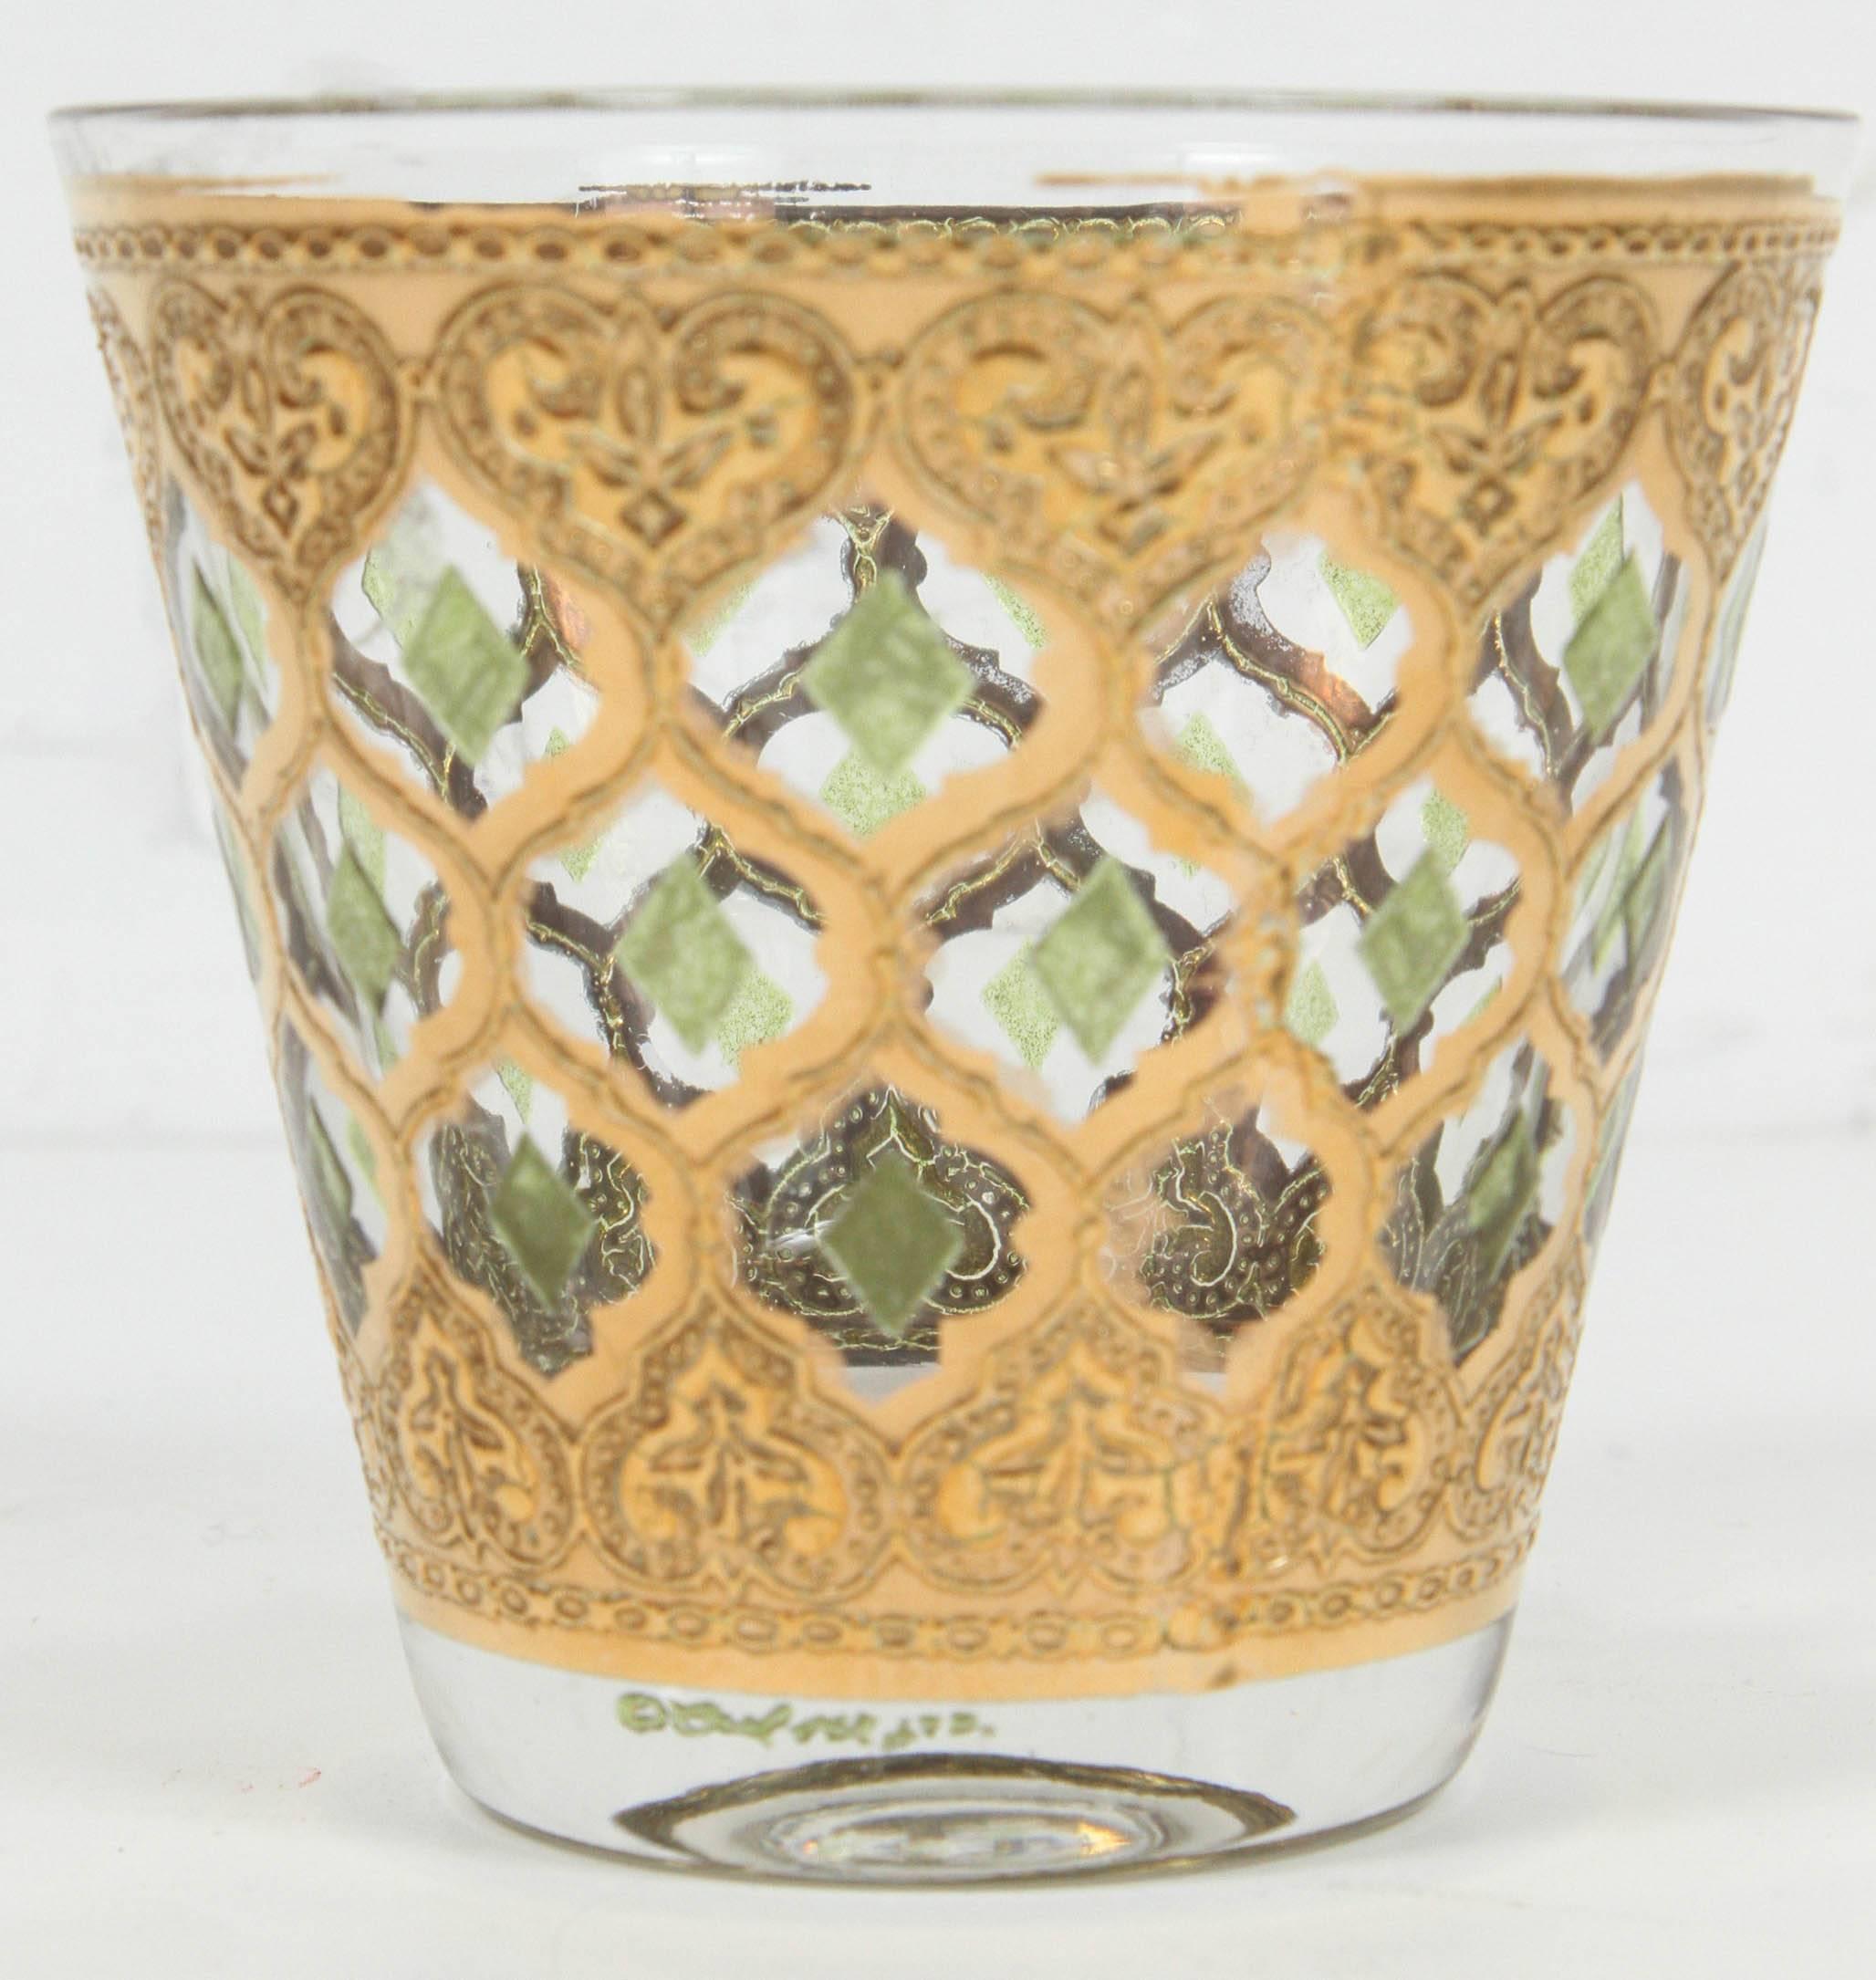 American Vintage Lowball Rocks Glasses from Culver with 22 Karat Gold Designs